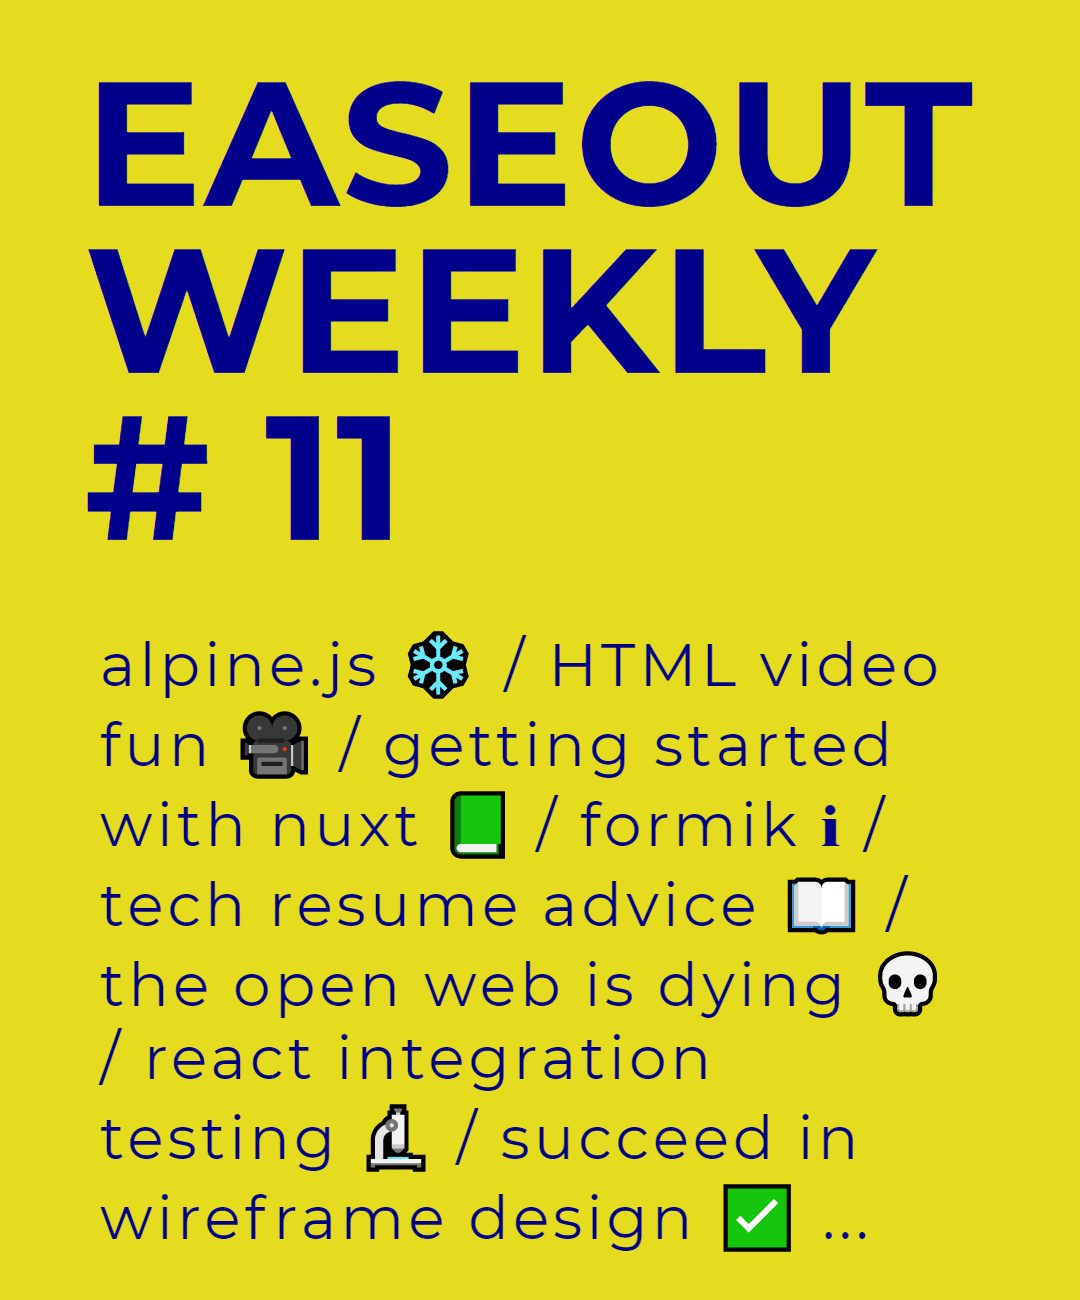 Easeout Weekly #11